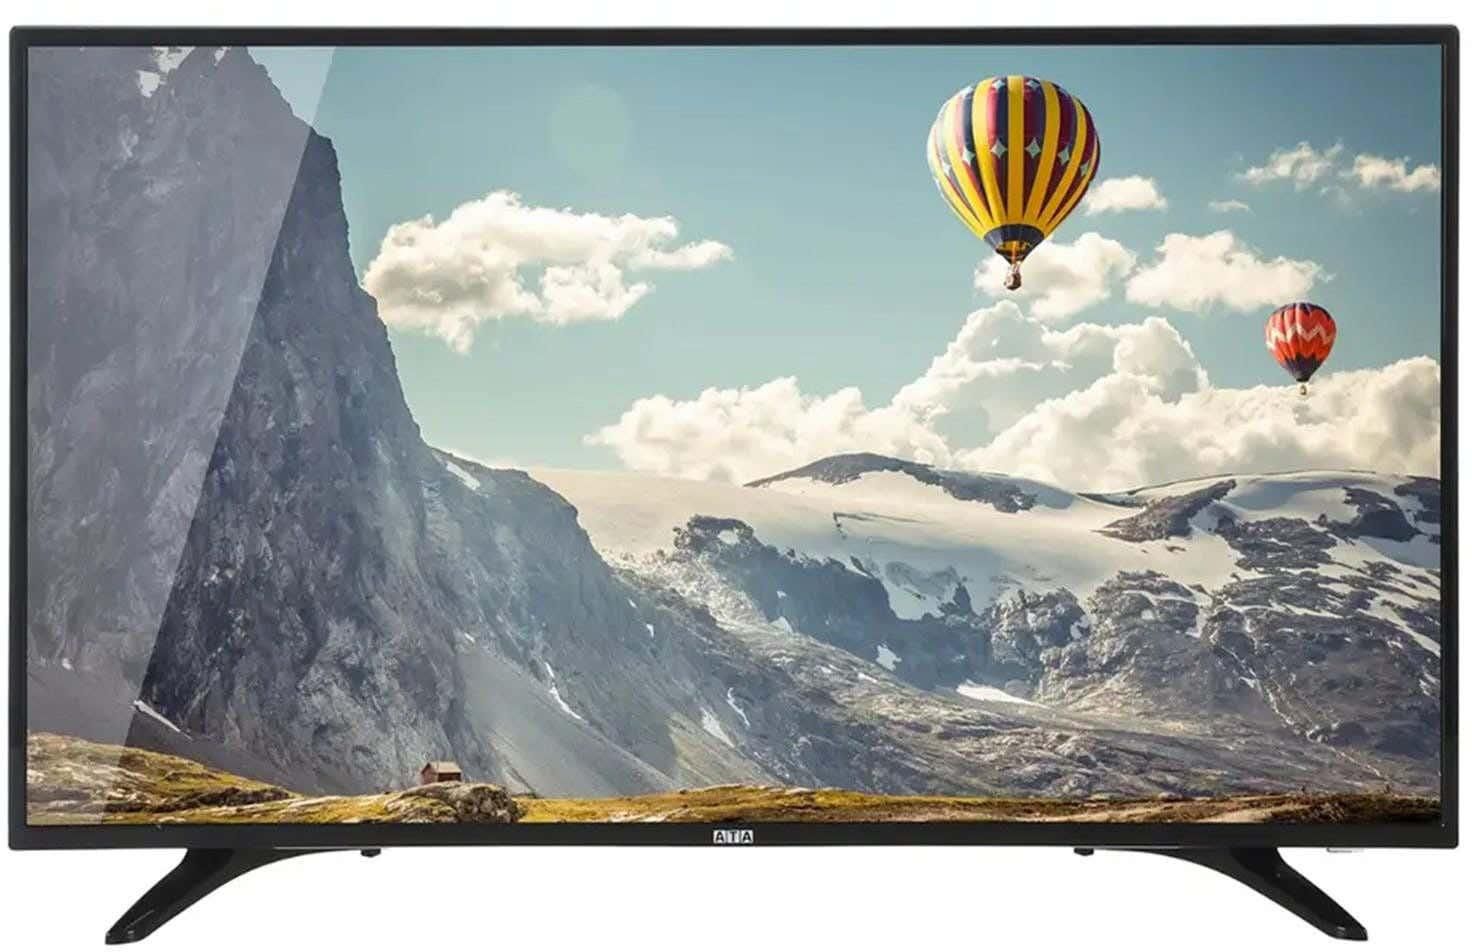 Get ATA 43DN4 43-Inch TV, Full HD, LED - Black with best offers | Raneen.com